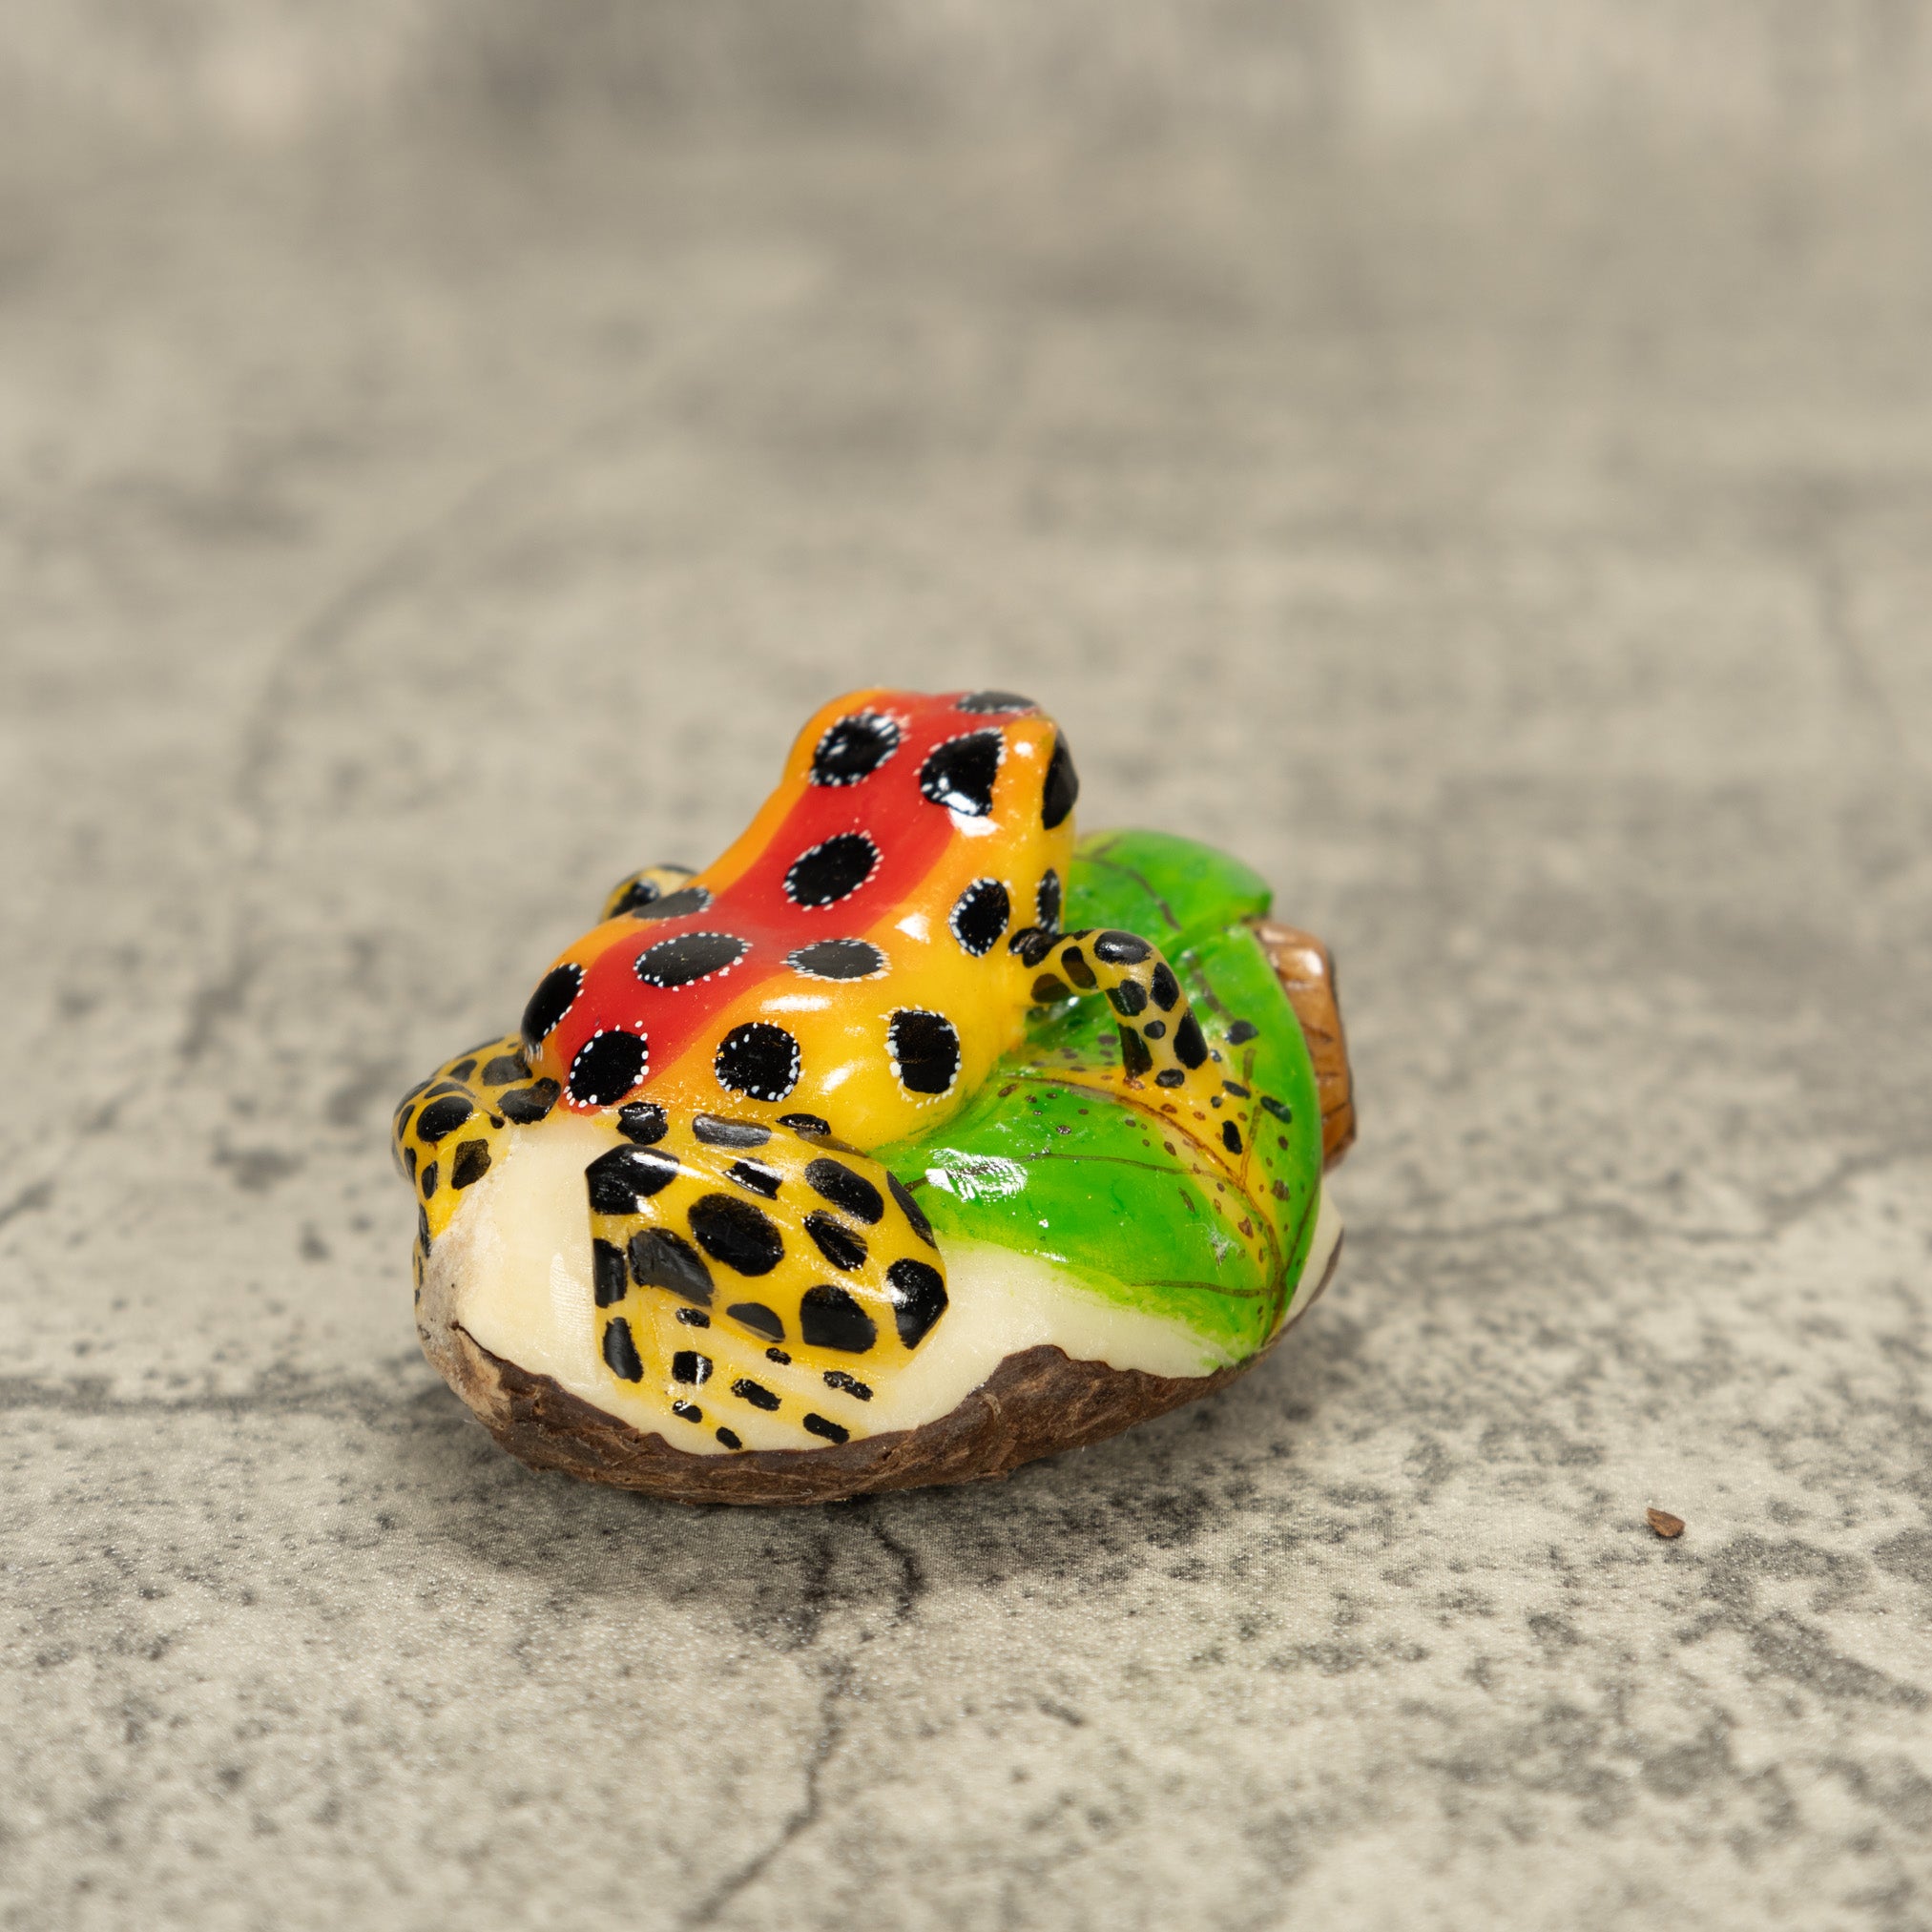 Orange And Red Poison Dart Frog Tagua Nut Carving